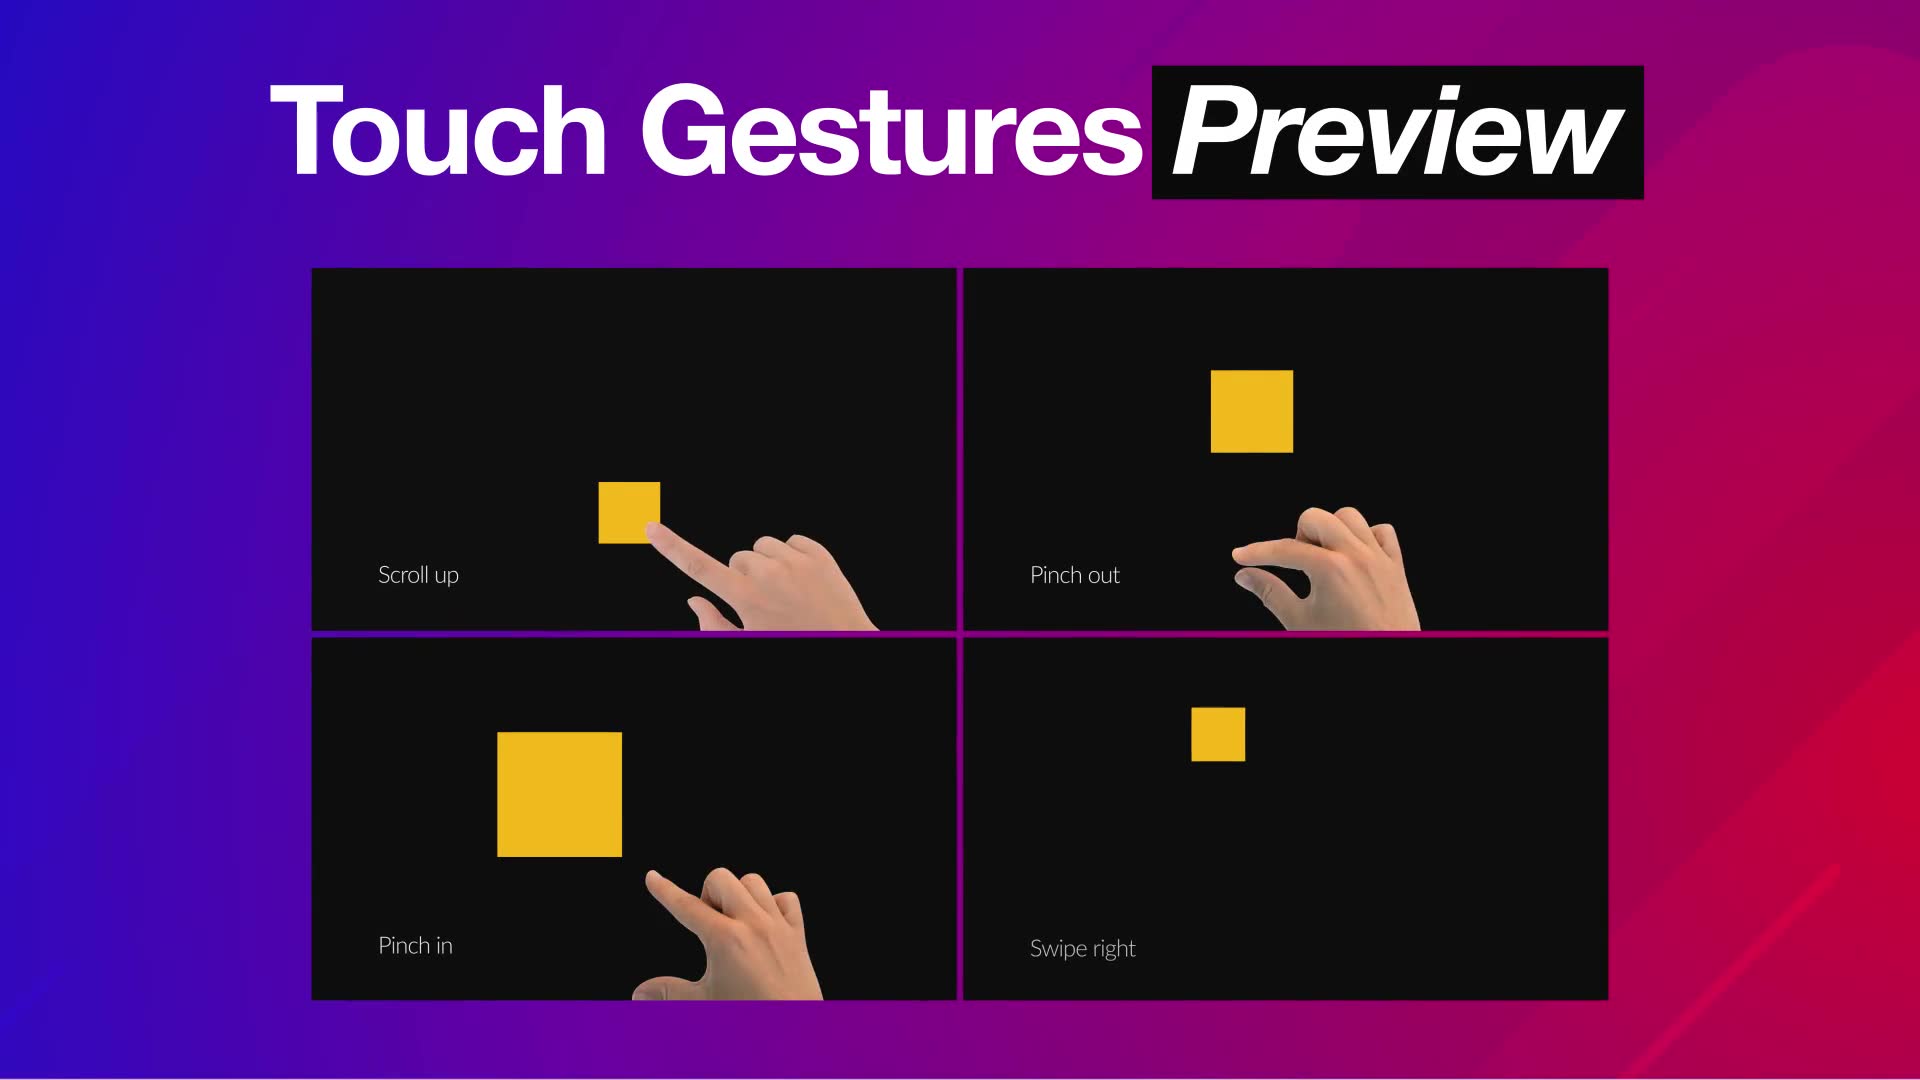 touch gestures after effects download free